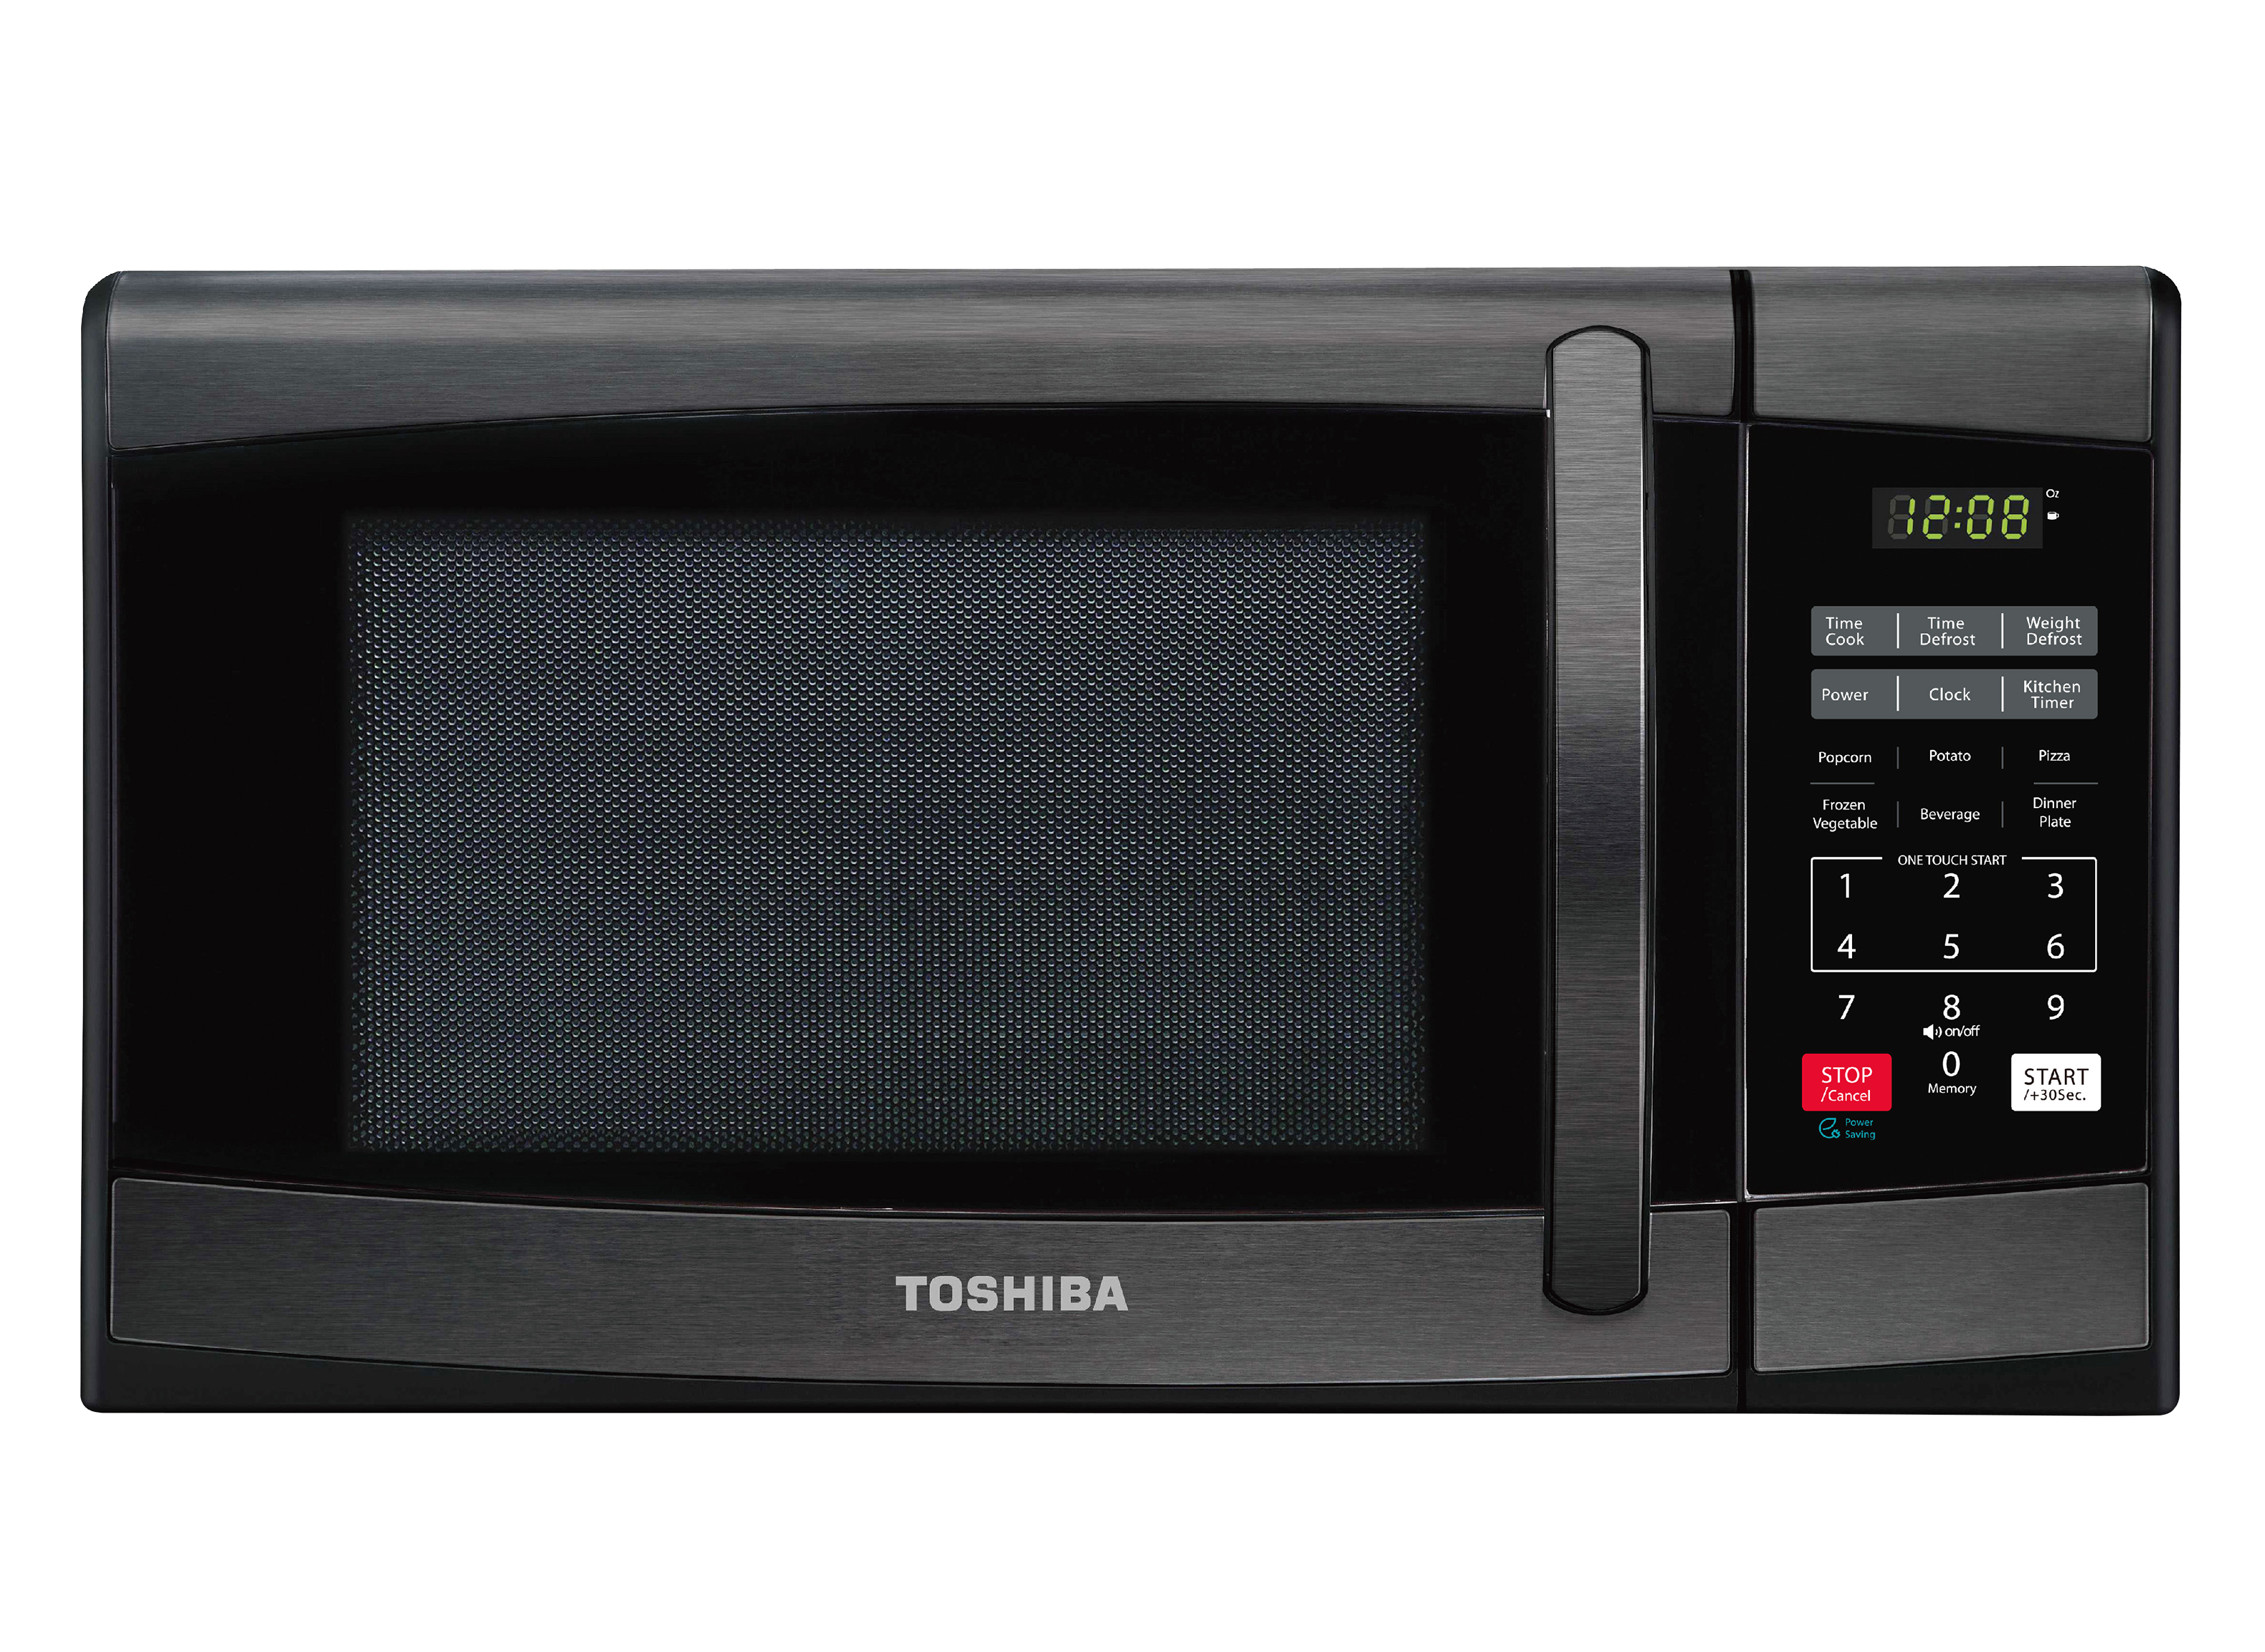  TOSHIBA 7-in-1 Countertop Microwave Oven Air Fryer